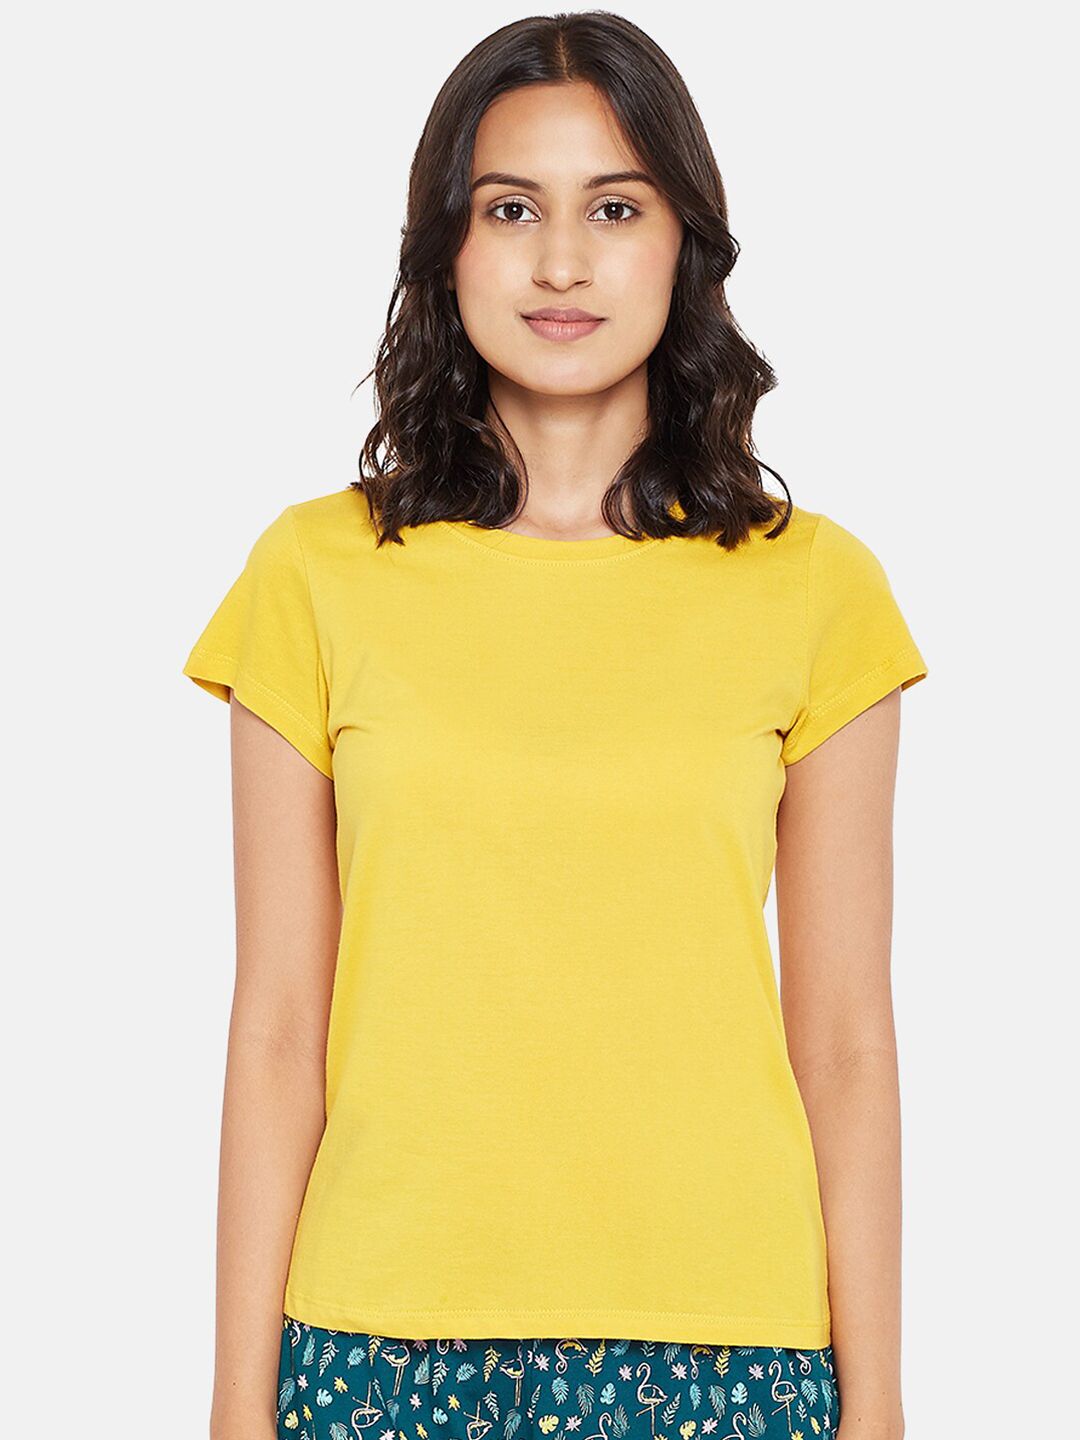 Dreamz by Pantaloons Women Yellow Solid Pure Cotton Regular Lounge tshirt Price in India